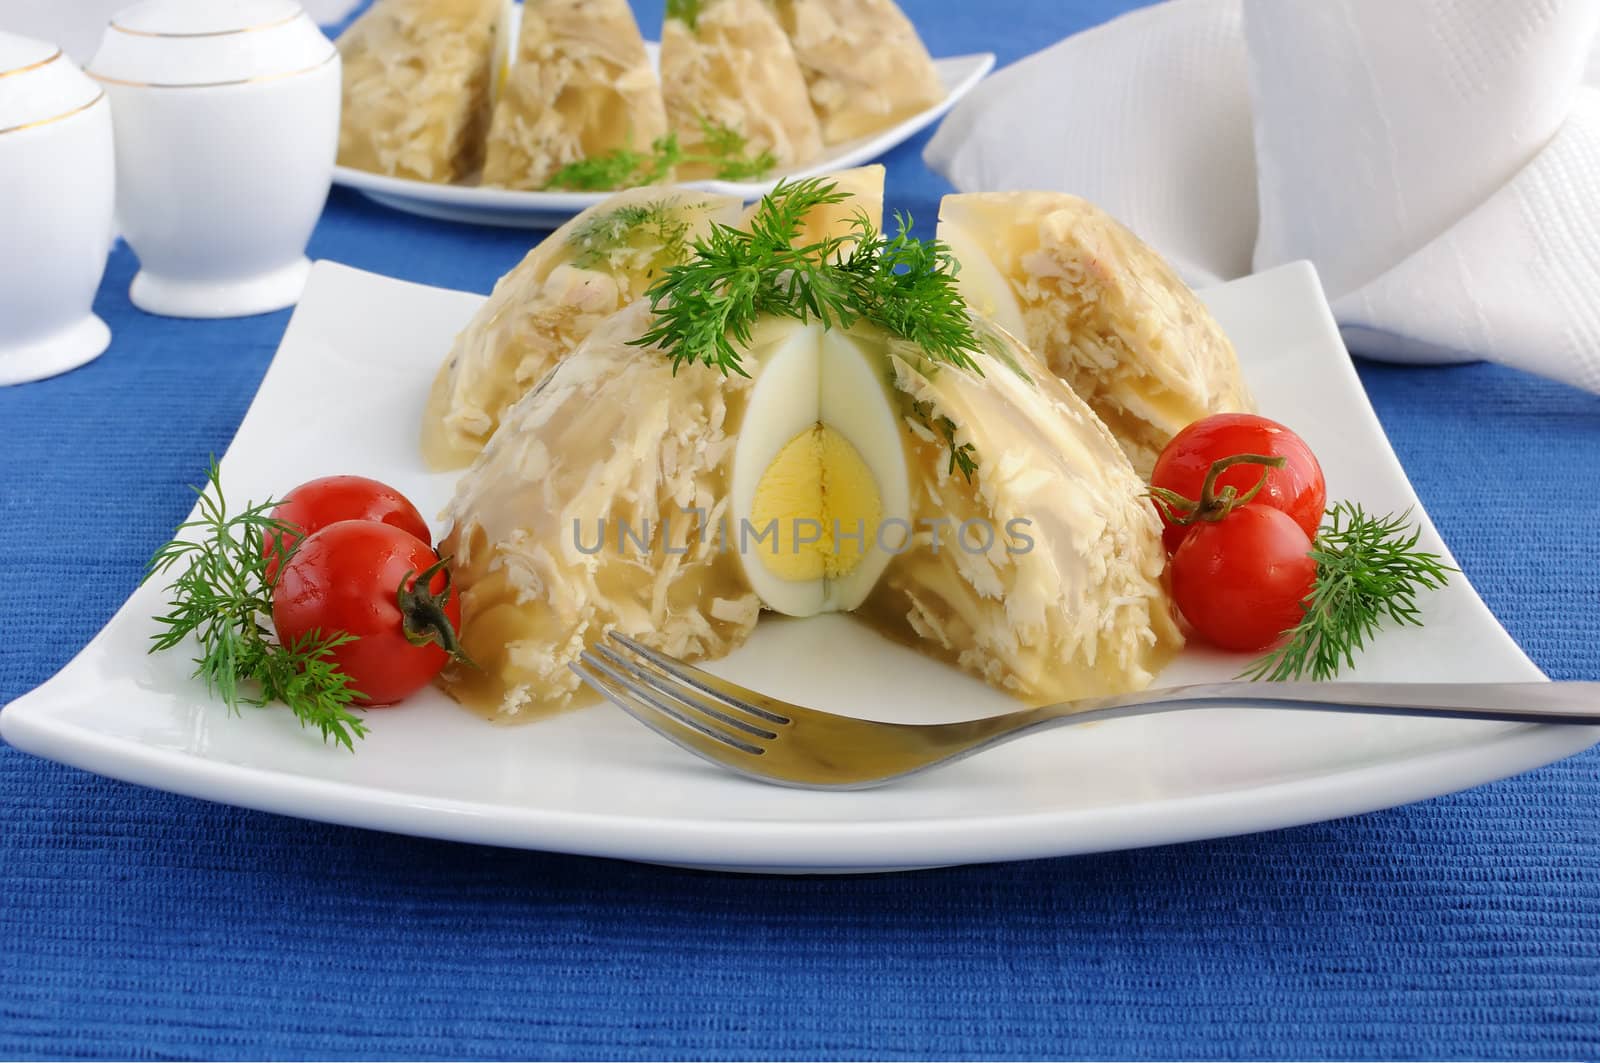 Jellied chicken decorated with egg and dill in the context of